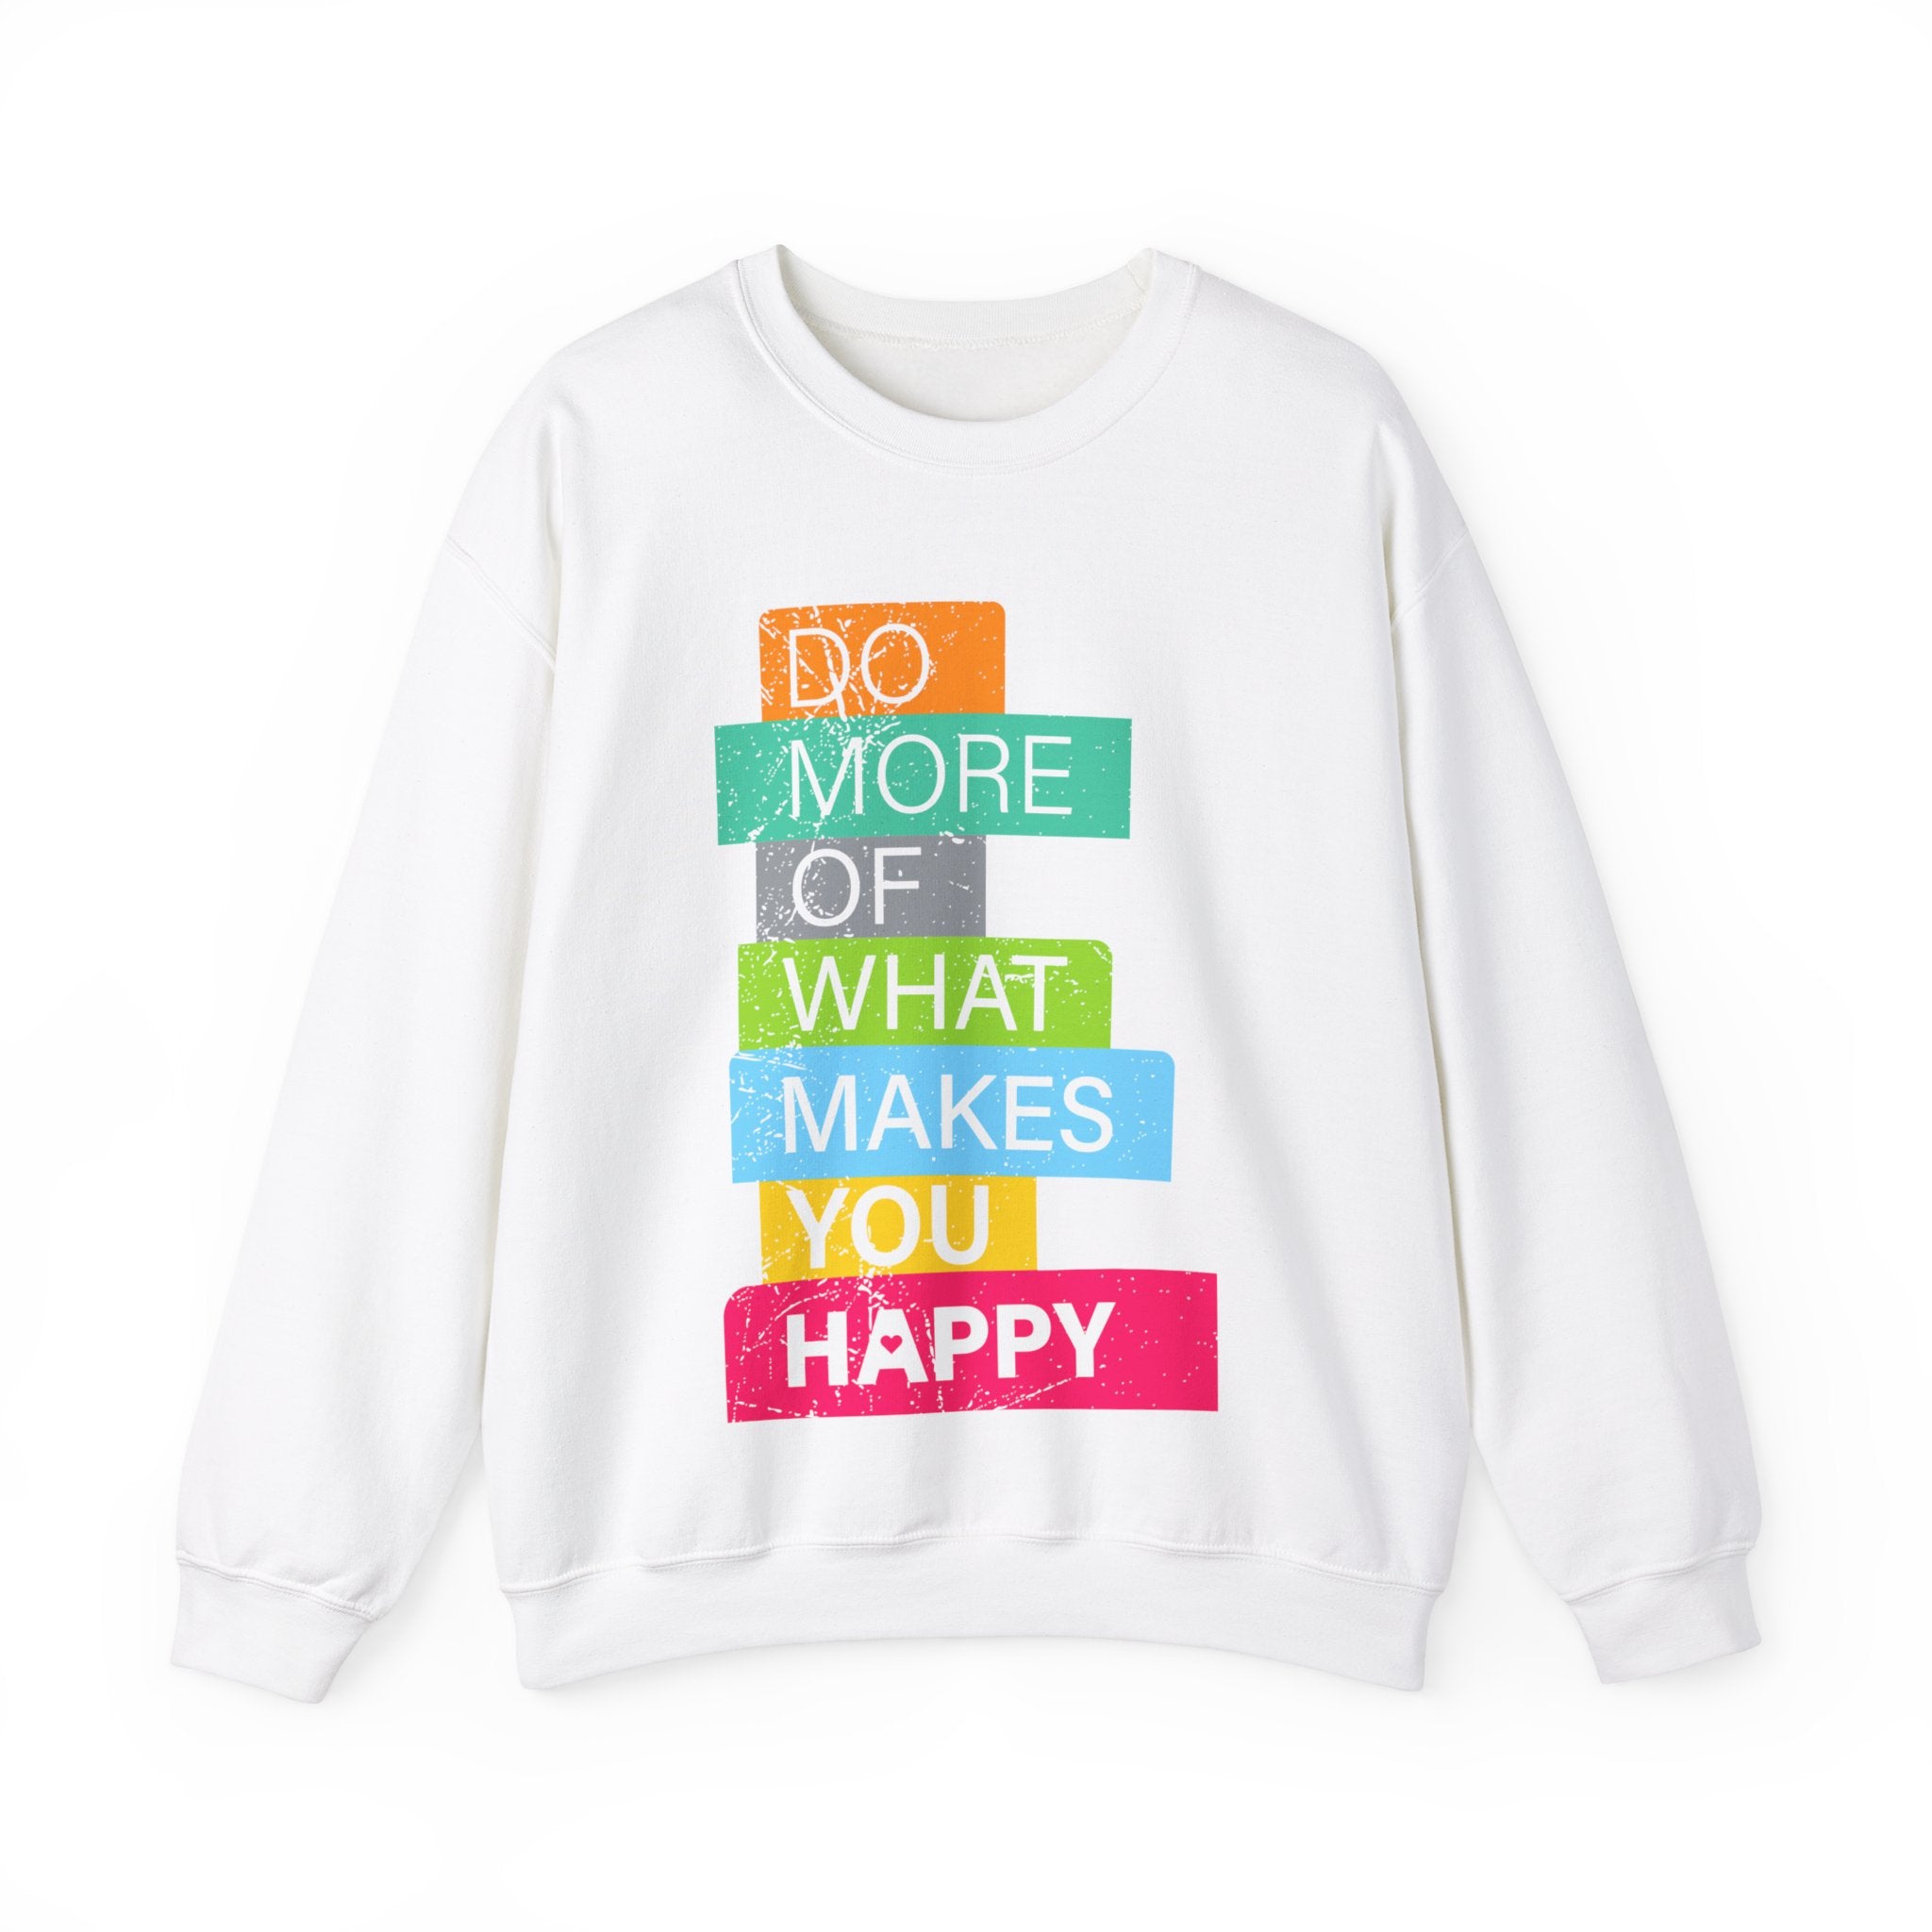 Do More of What Makes You Happy -  Sweatshirt